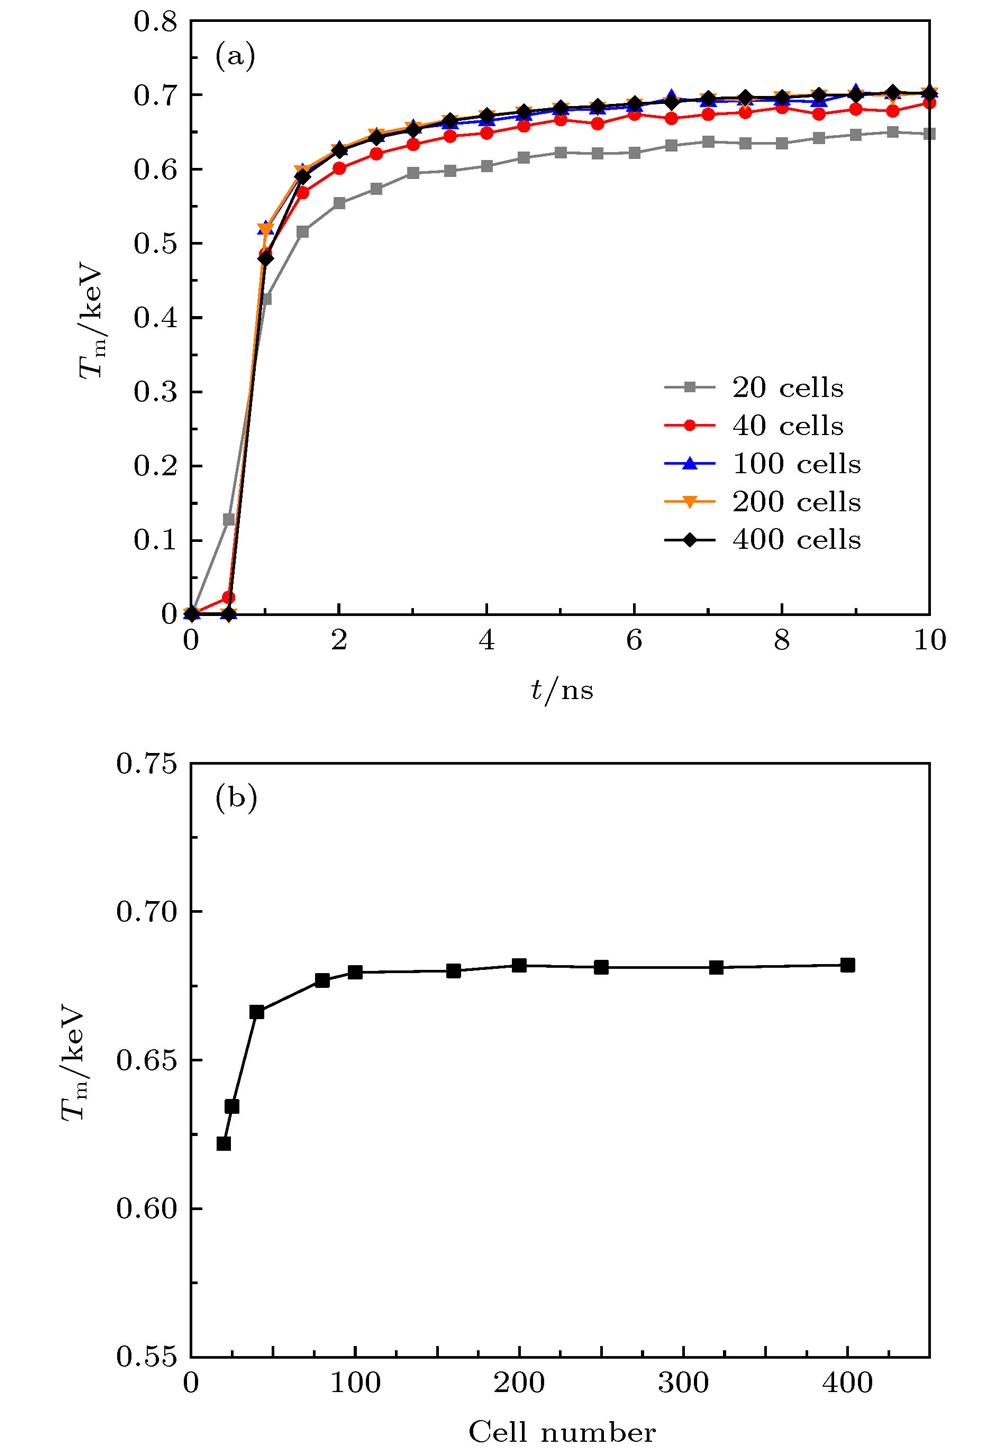 The convergence of material temperature: (a) Material temperature change with time in r = 0.05 cm; (b) material temperature change with cell number in r = 0.05 cm (t = 5 ns).